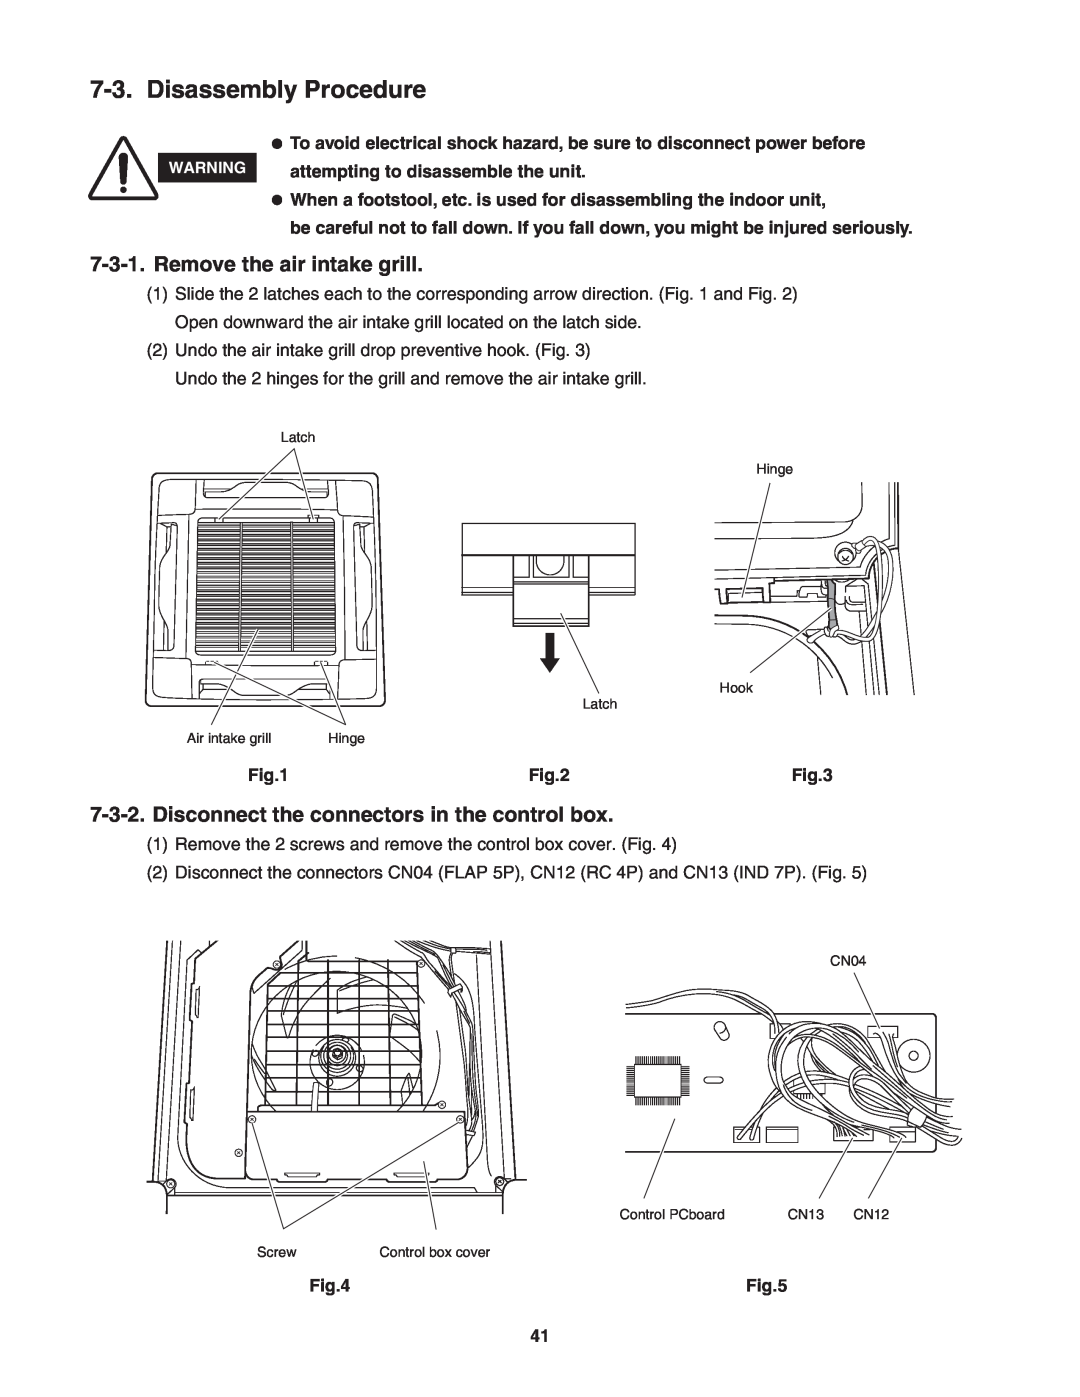 Panasonic CS-KS18NB4UW, CS-KS12NB41, CZ-18BT1U + CU-KS18NKUA Disassembly Procedure, Remove the air intake grill 